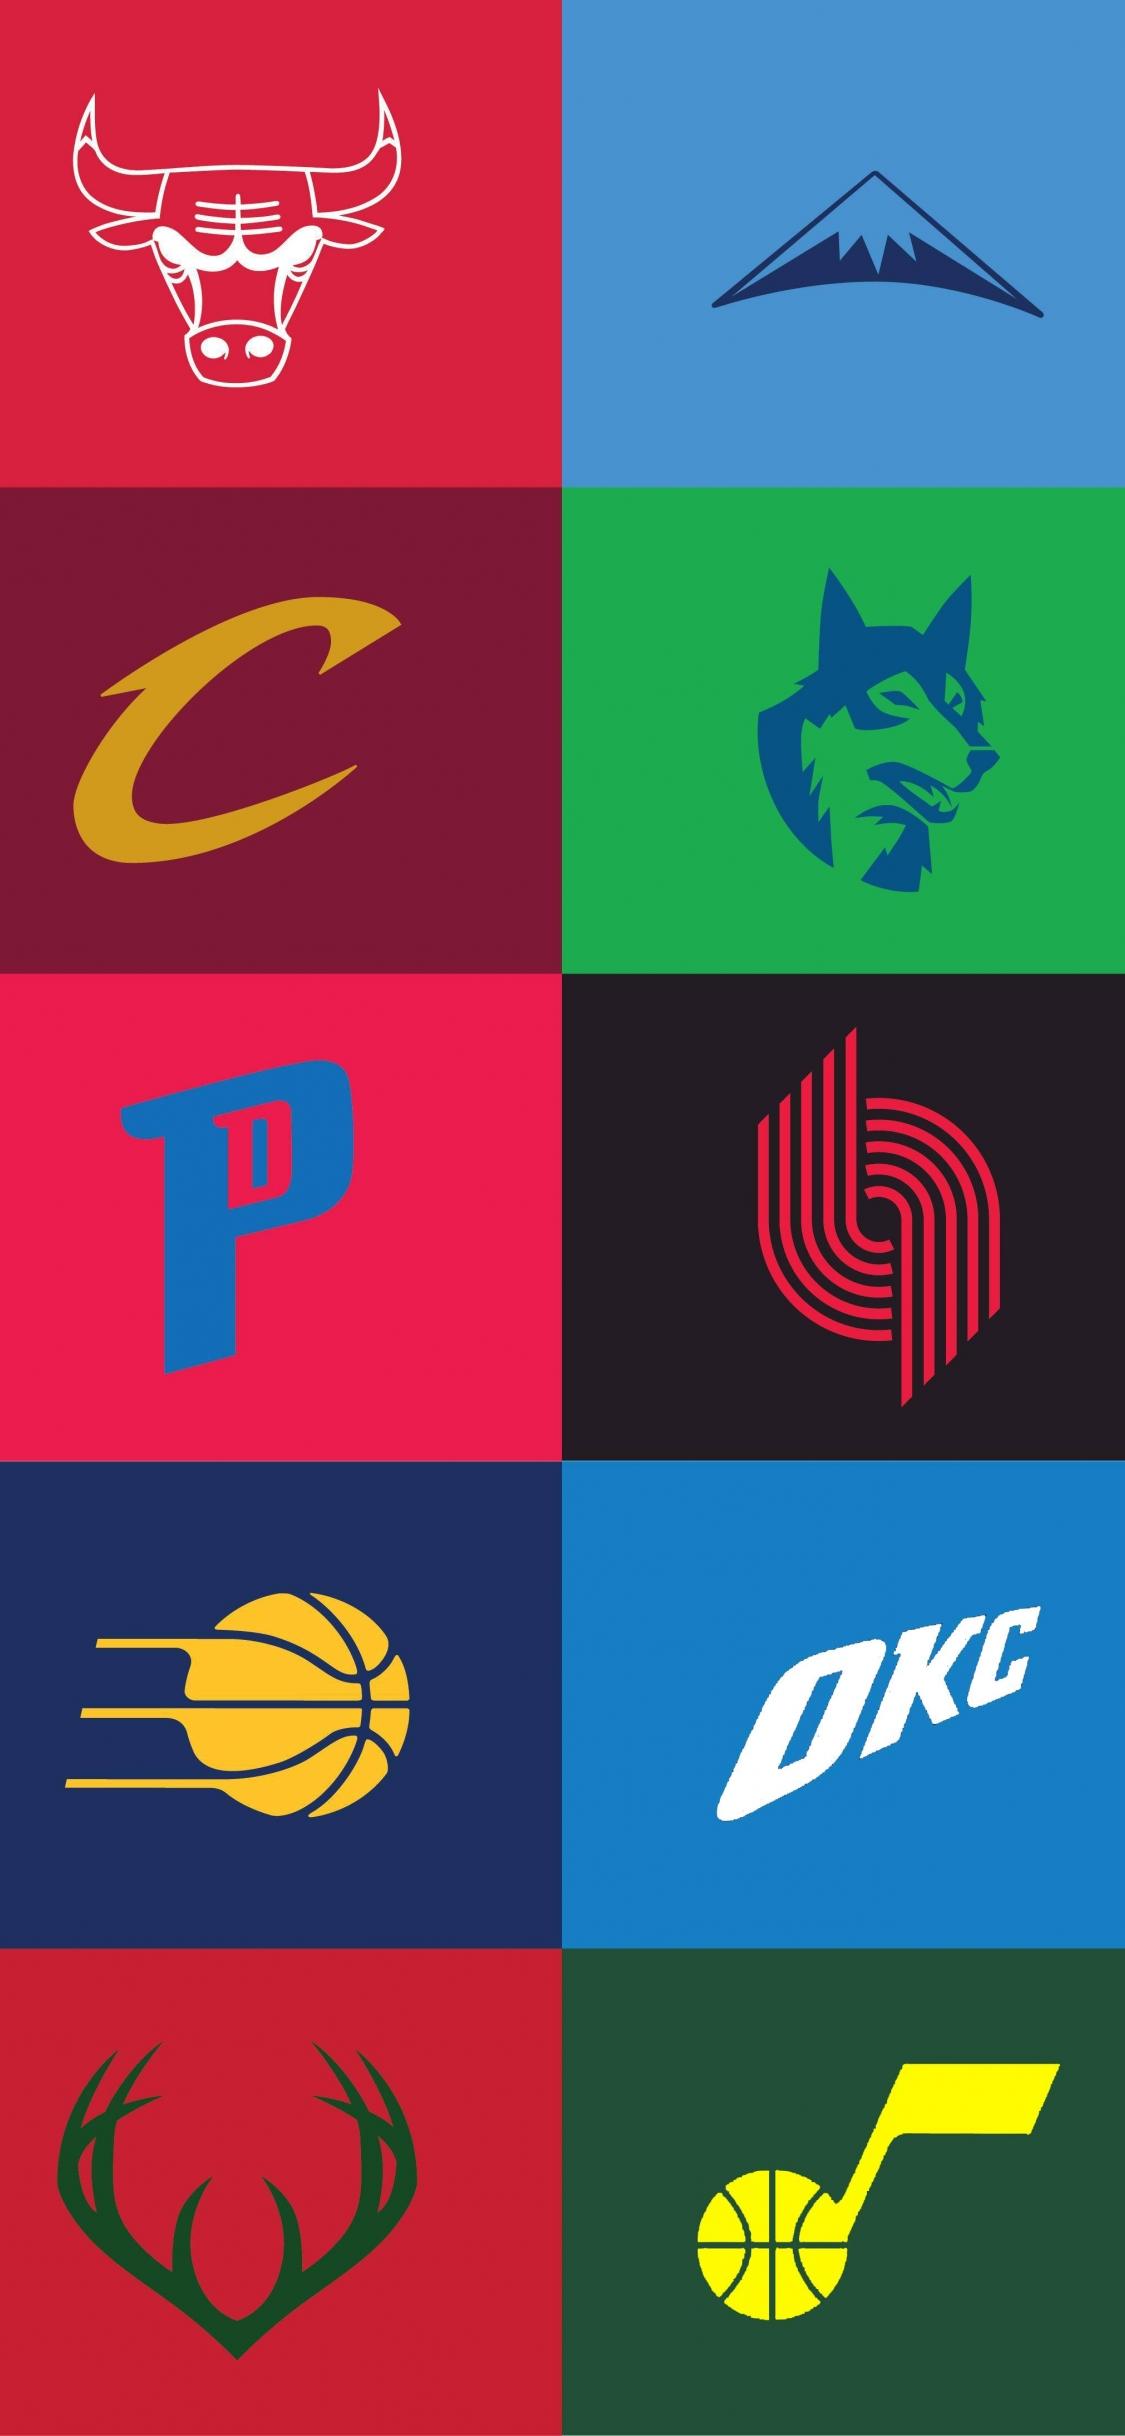 Free download made a few adjustments to the minimalist NBA